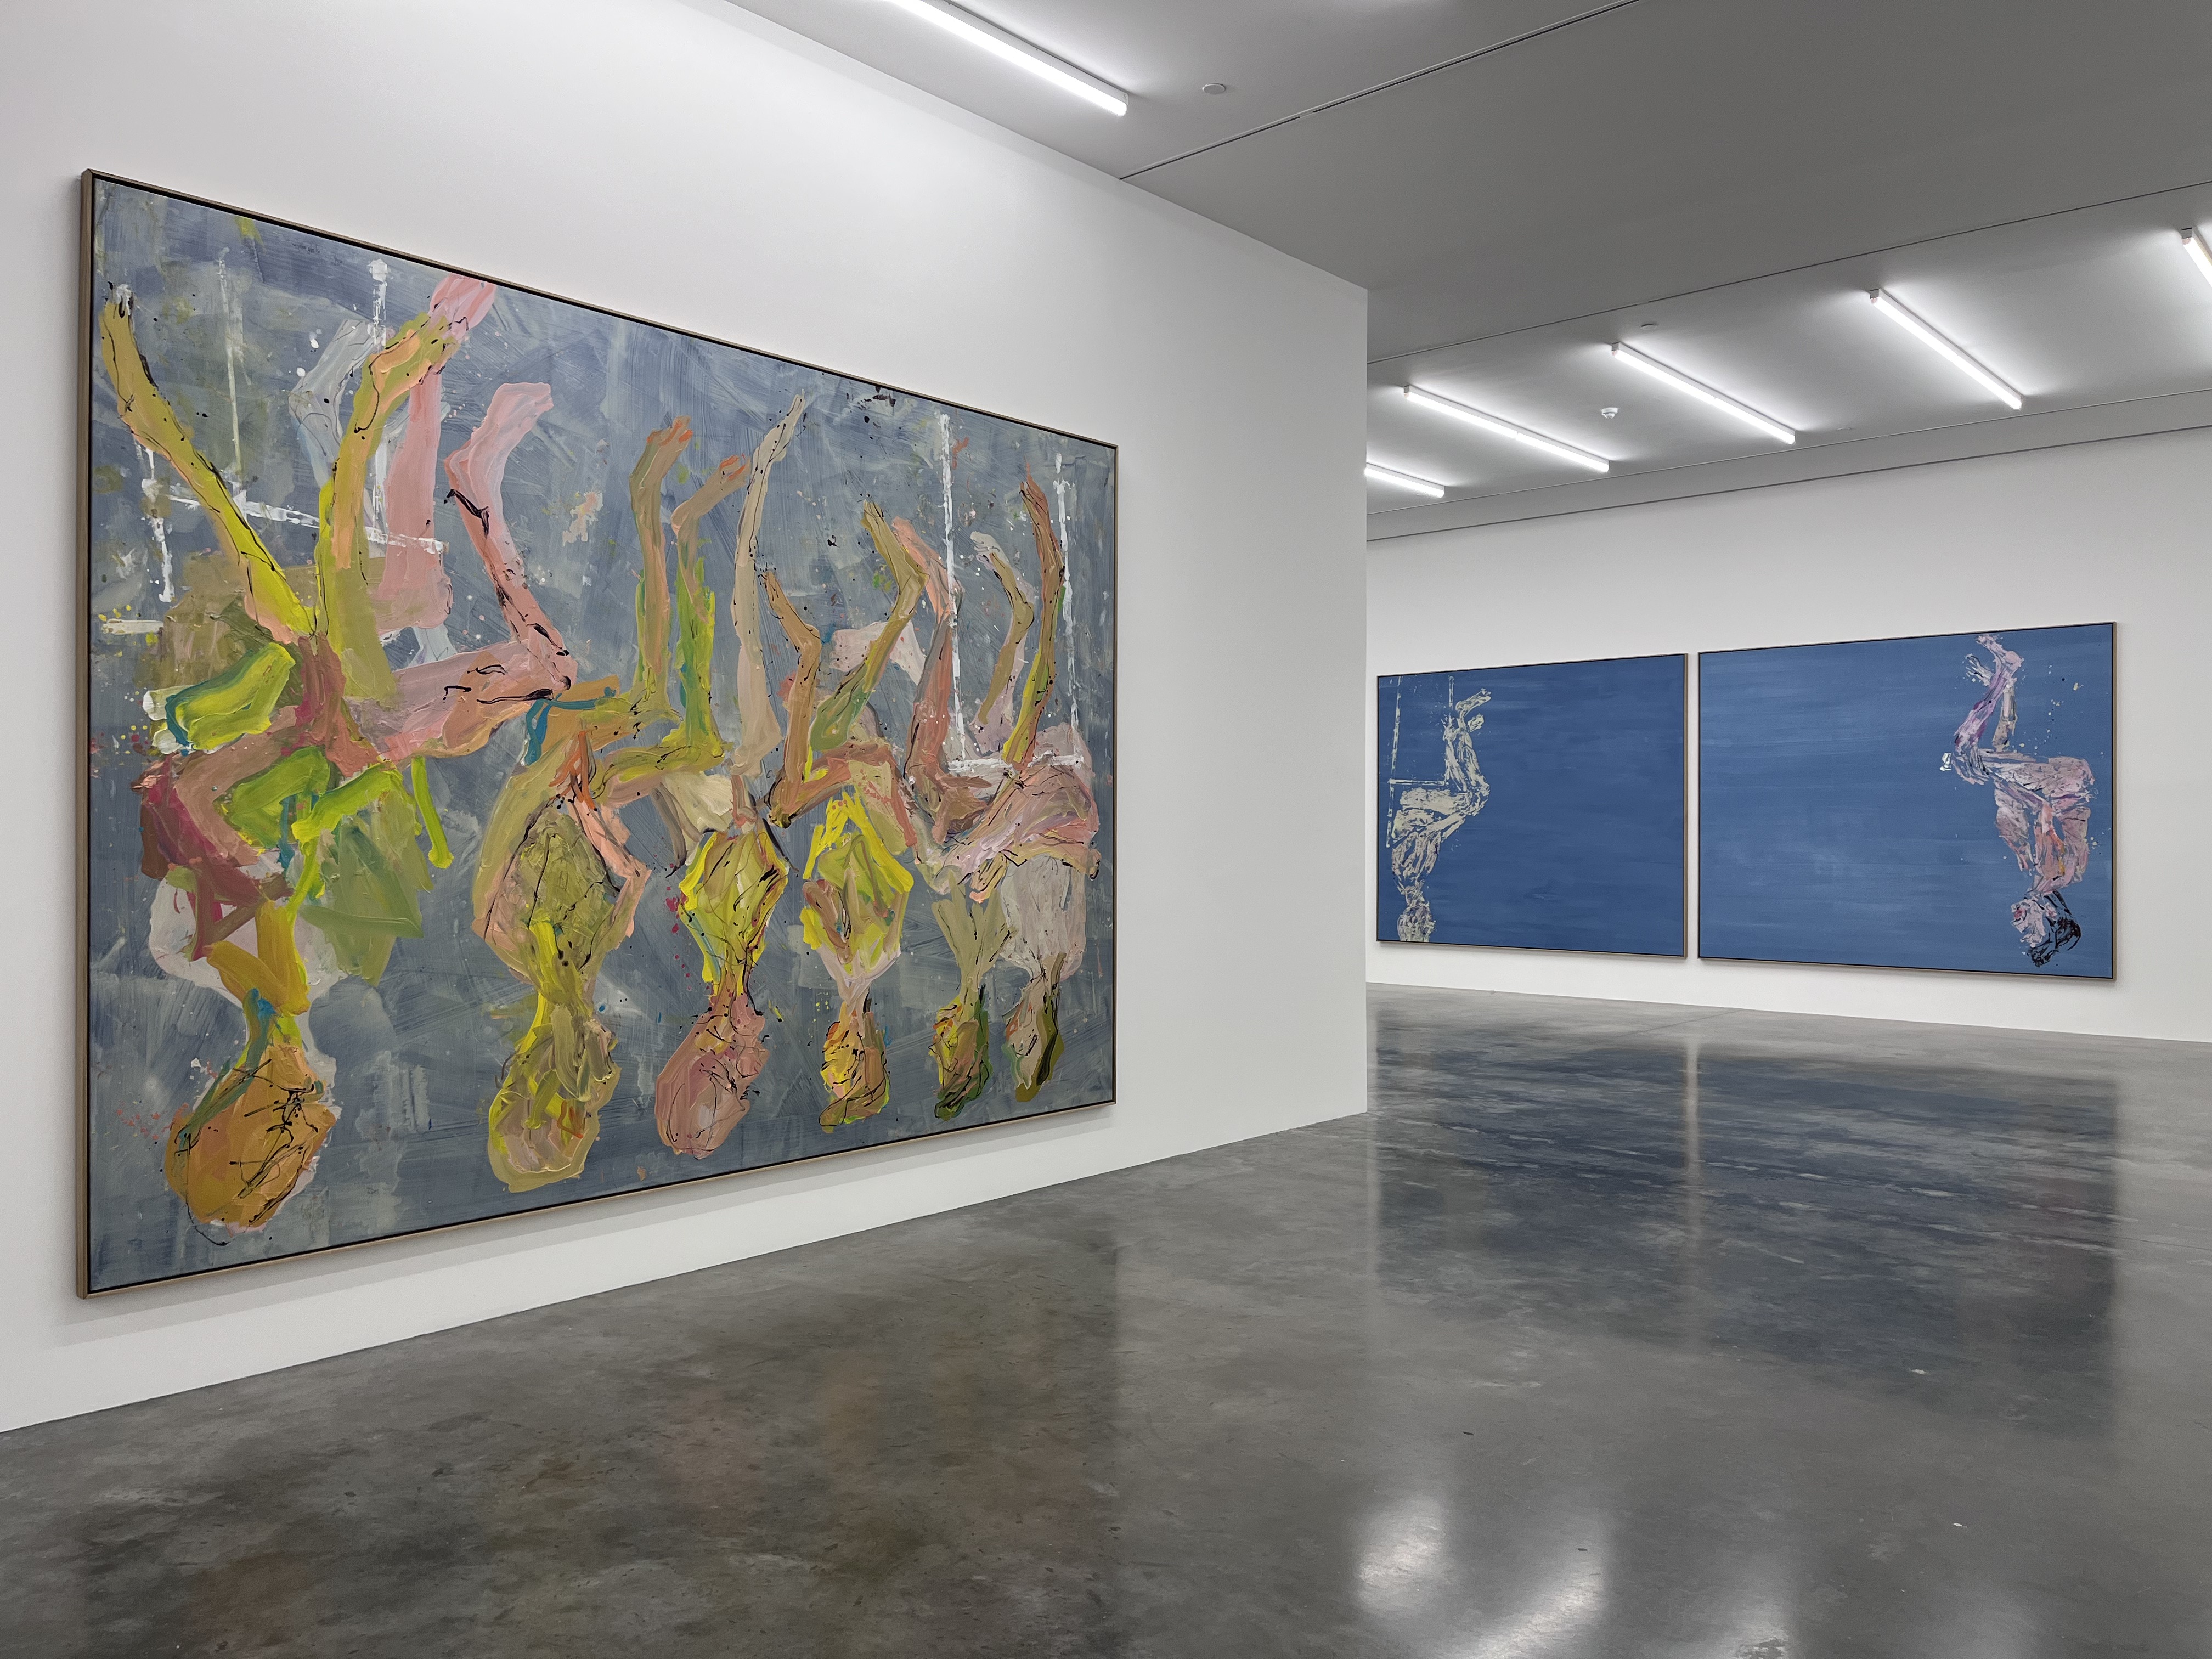 Georg Baselitz “A Confession of My Sins” at White Cube Bermondsey